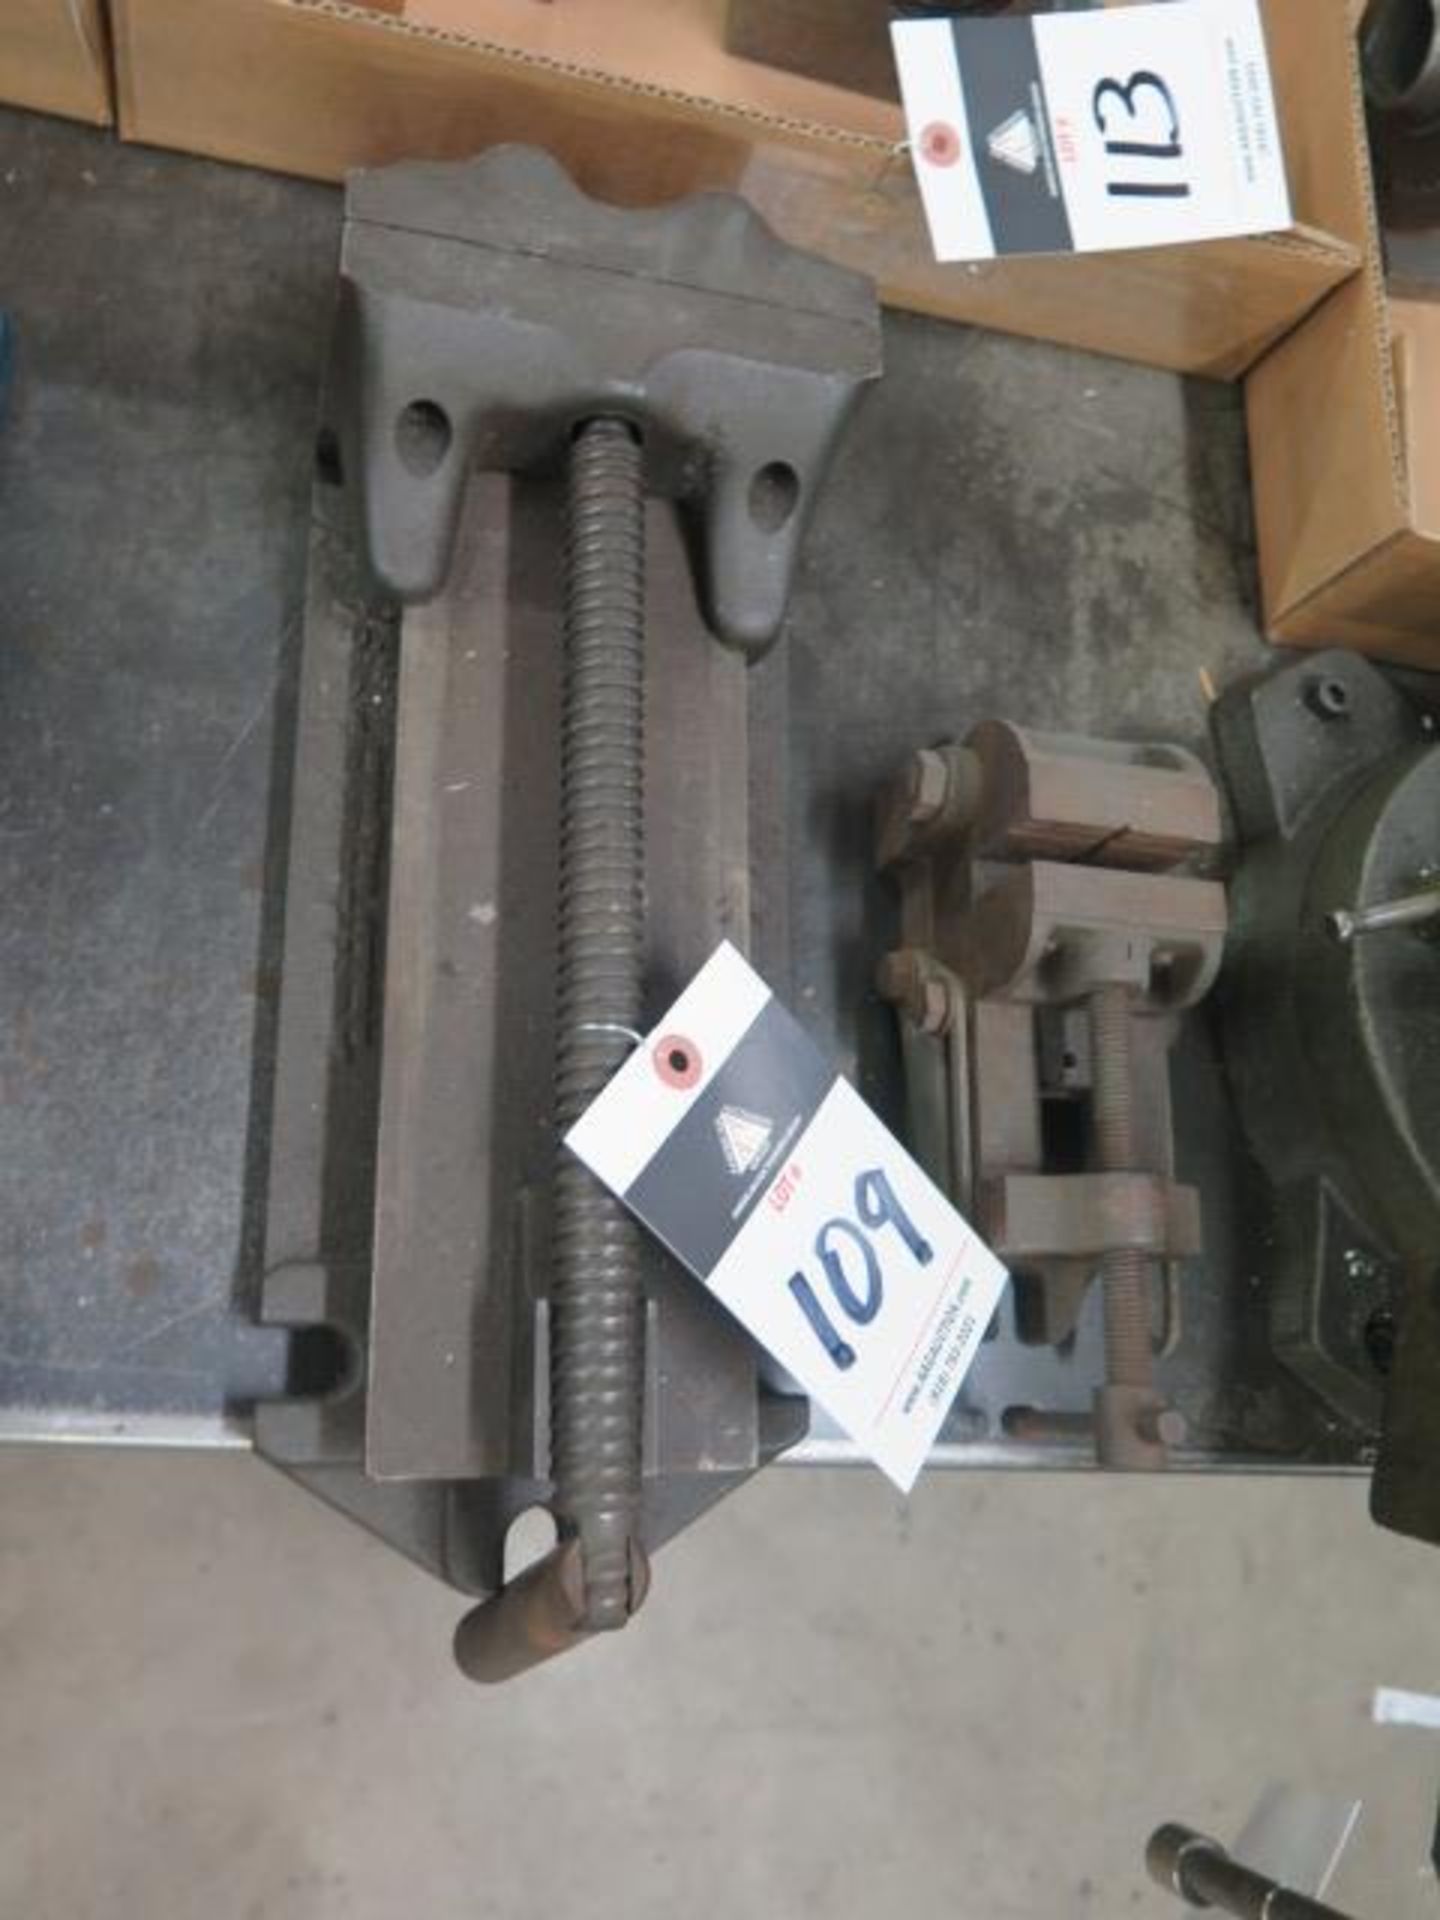 6" Speed Vise and Small Machine Vise